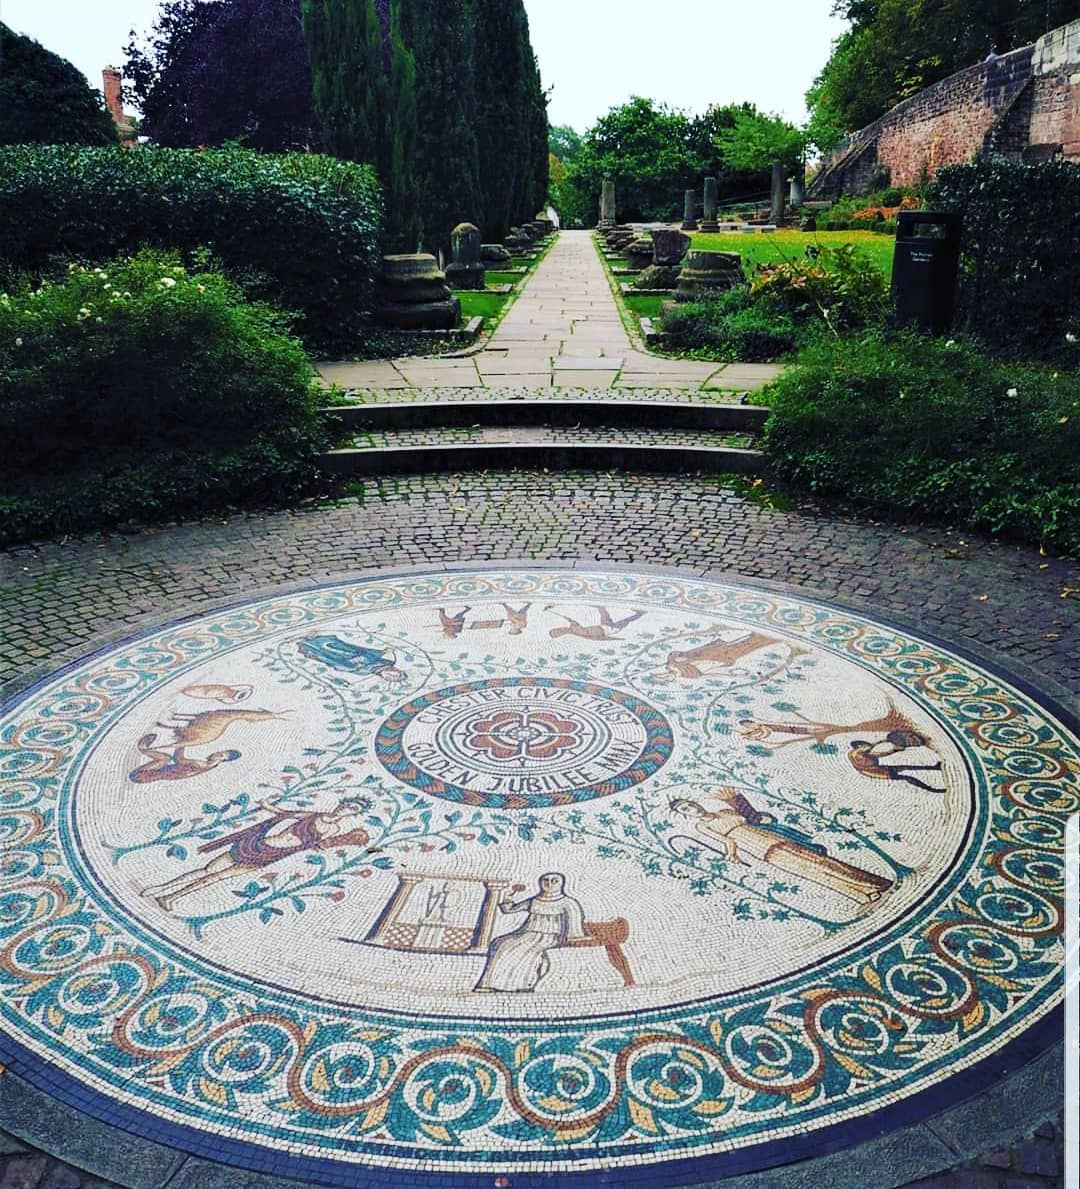 One of the last places we visited in Chester was the Roman Gardens next part of the city walls and Roman Amphitheatre.

The gardens themselves are quite nice. They house a collection of Roman Columns and stonework from previous excavations found in this area. . . .

#visitbritain #visitchester #visitengland #gardens #roman #romancity #chestercitycentre #chester #romangardens #history #historicalcity #medievalcity #medieval #ruins #ancientruins #travelling #travelphotos #traveltheglobe #traveler #explore #exploreuk #daytour #daytrip #photosofbritain #photo #photography #photography📷 #instaphoto #instatraveling #traveltheworld